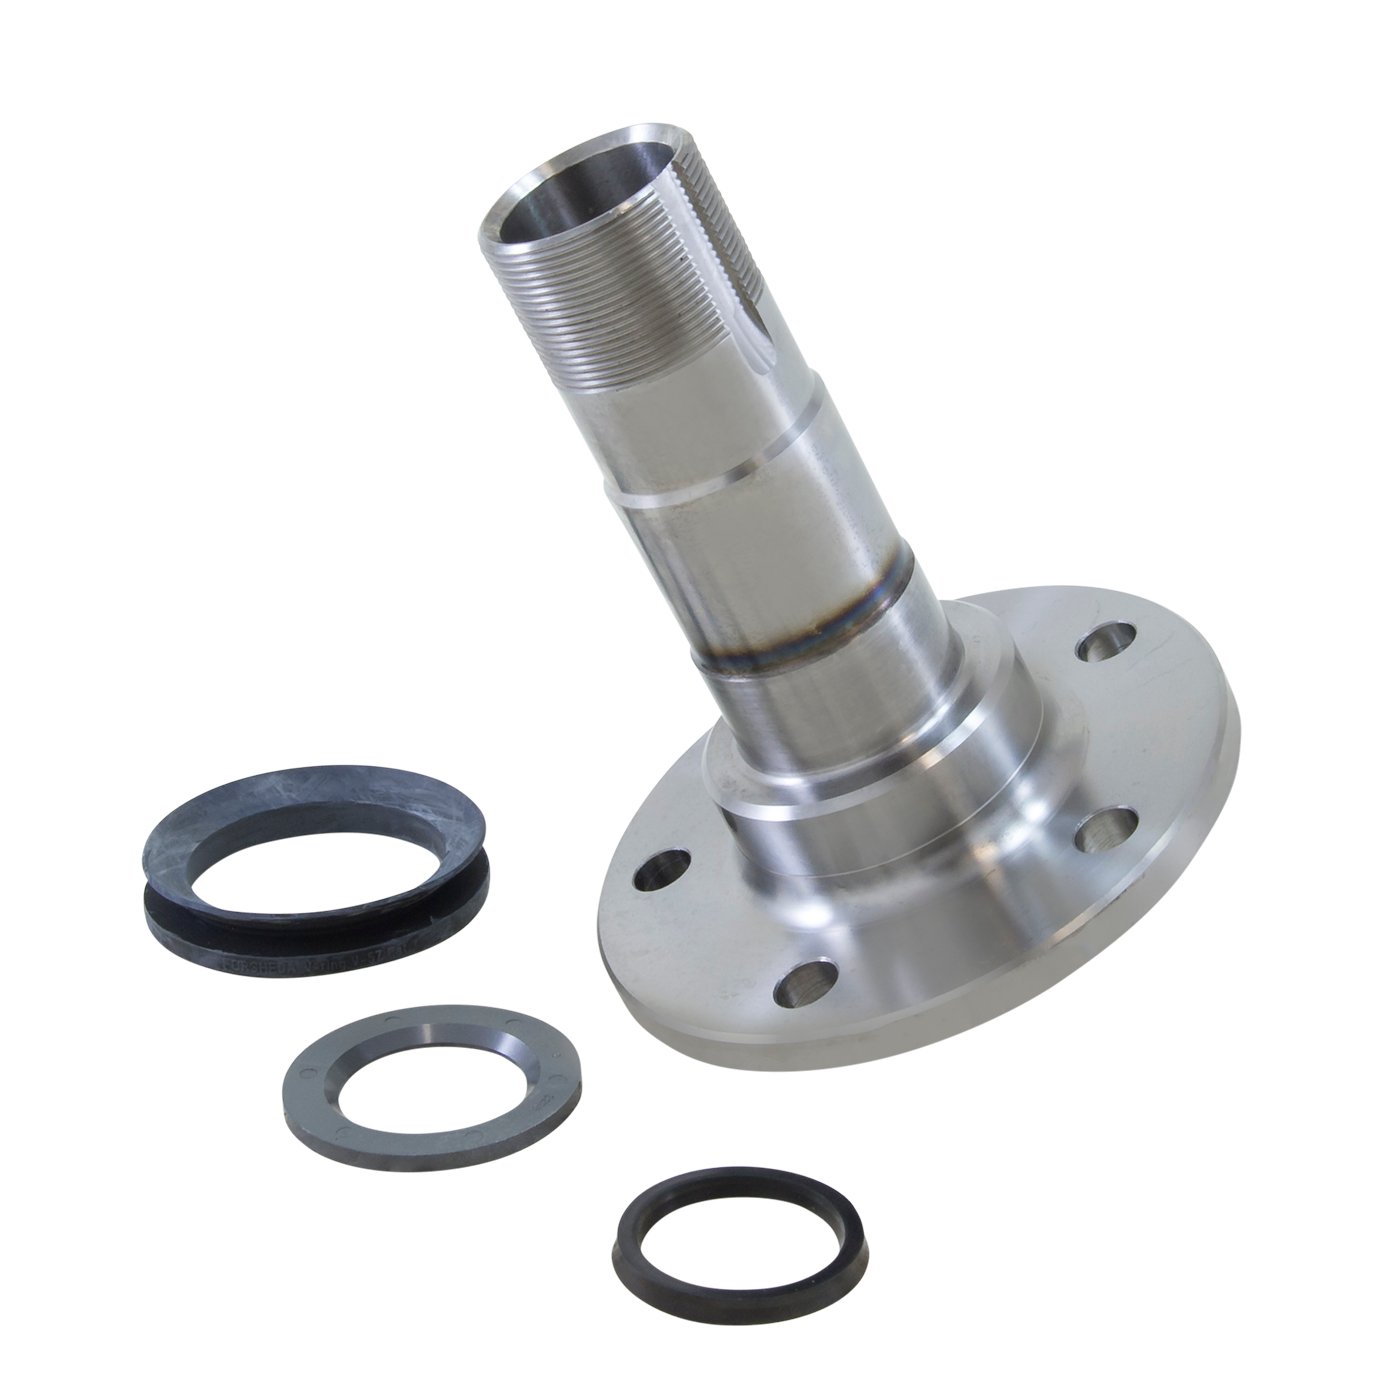 Replacement Front Spindle For Dana 44 Ifs, 93